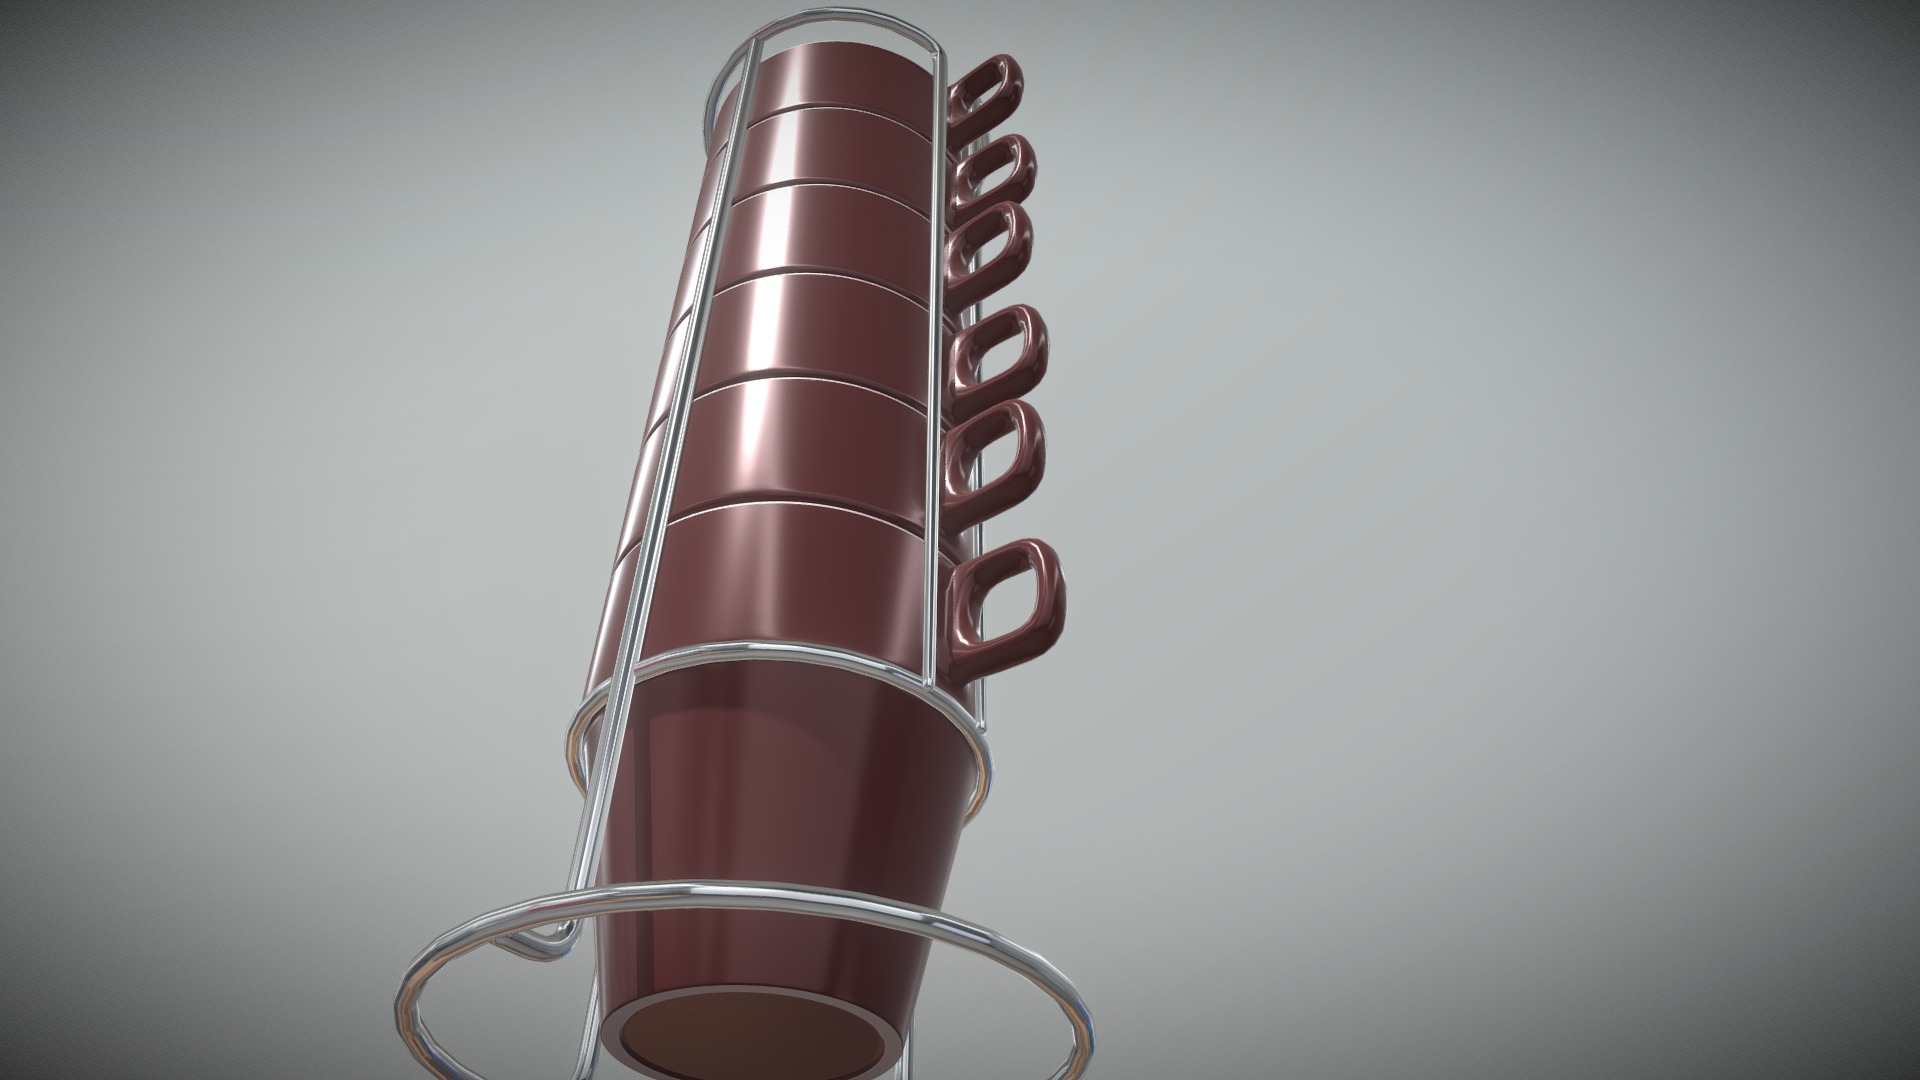 3D model Mug Rack - This is a 3D model of the Mug Rack. The 3D model is about a silver and gold guitar.